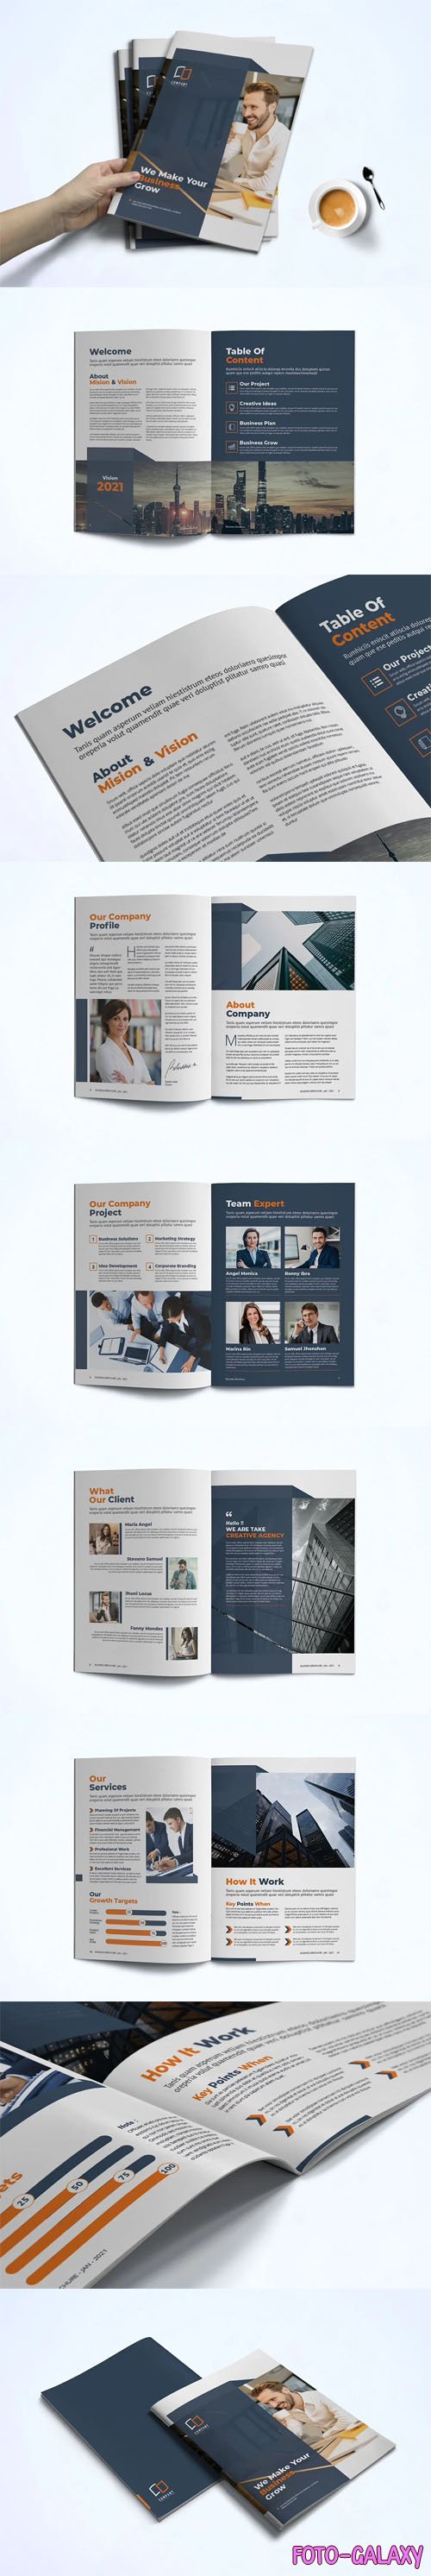 Business Brochure InDesign Template [A4/US Letter]